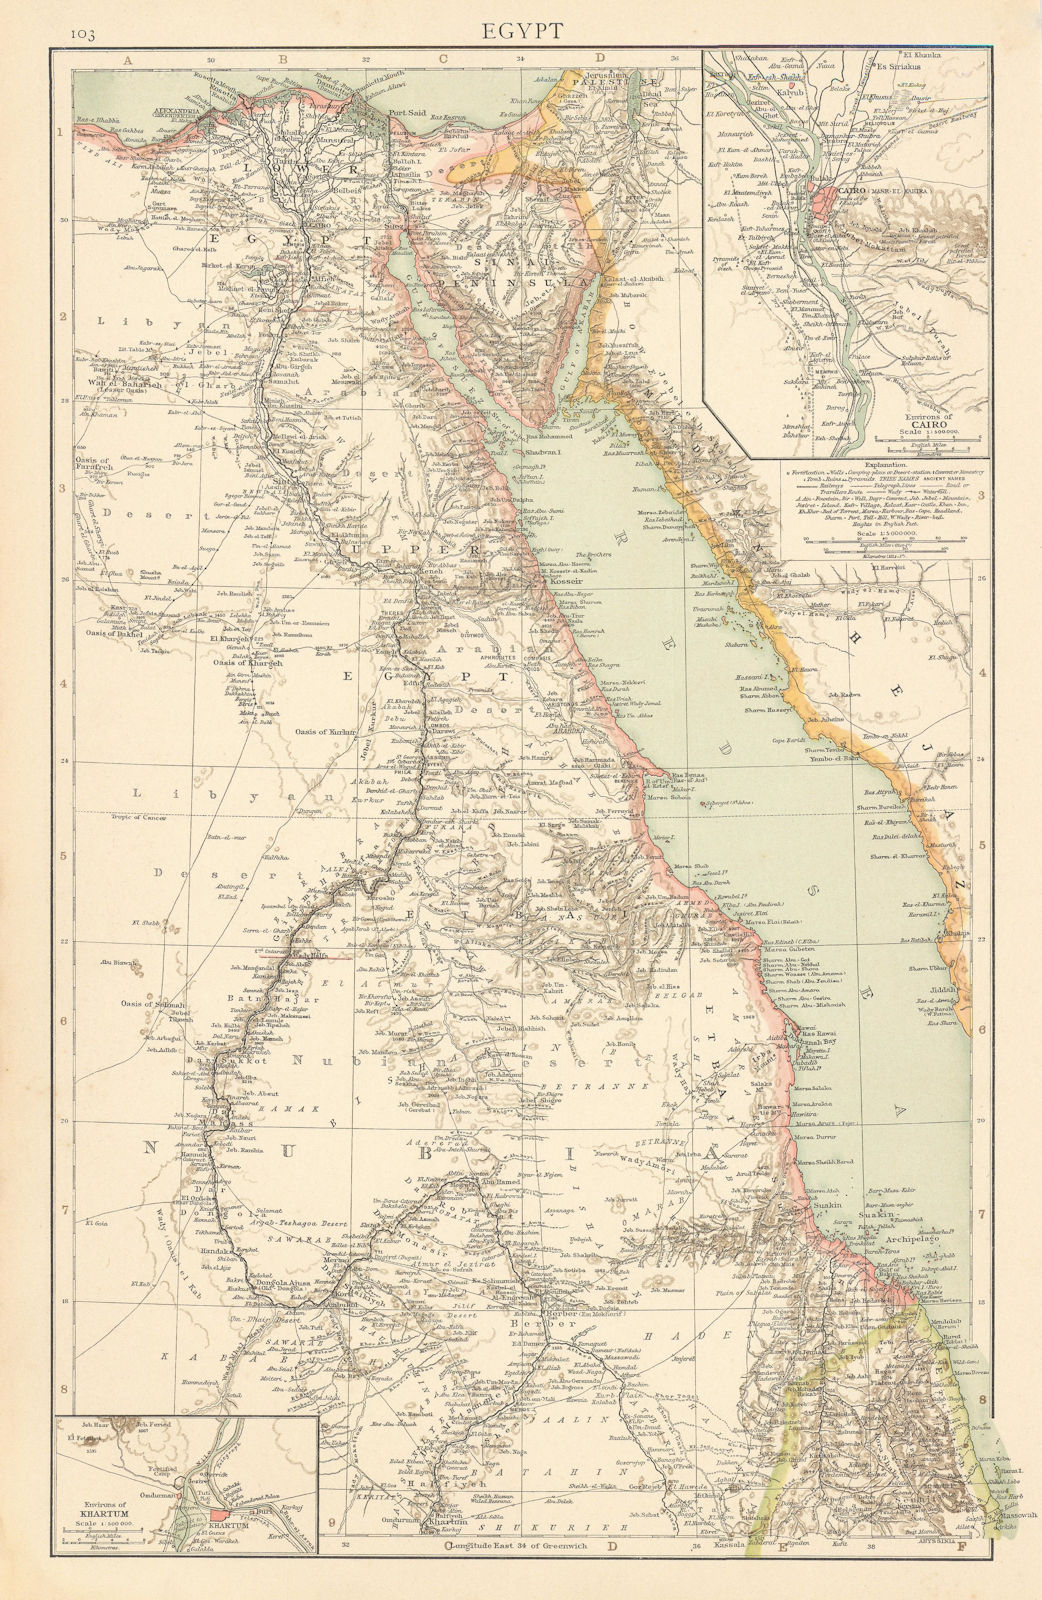 Associate Product Egypt. Nile Valley. Khartoum & Cairo environs. Red Sea. THE TIMES 1895 old map